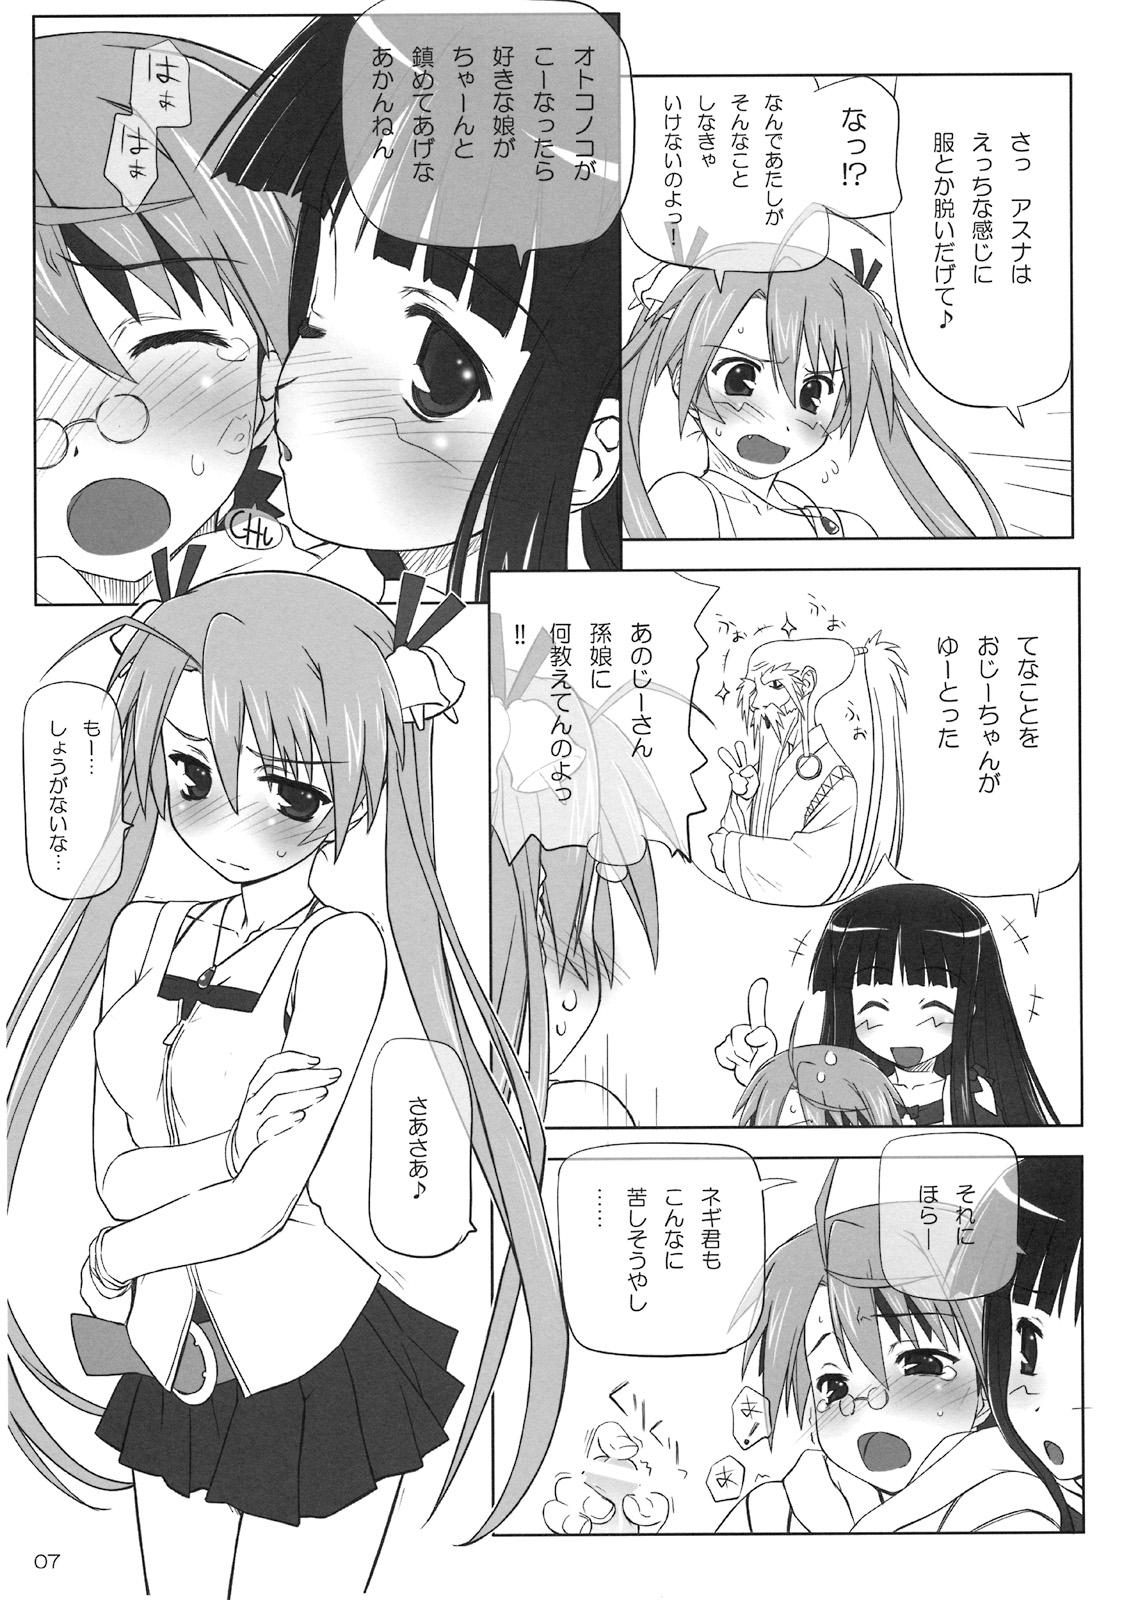 Stepfather Dear My Little Witches 2nd - Mahou sensei negima Gay Bukkakeboy - Page 6